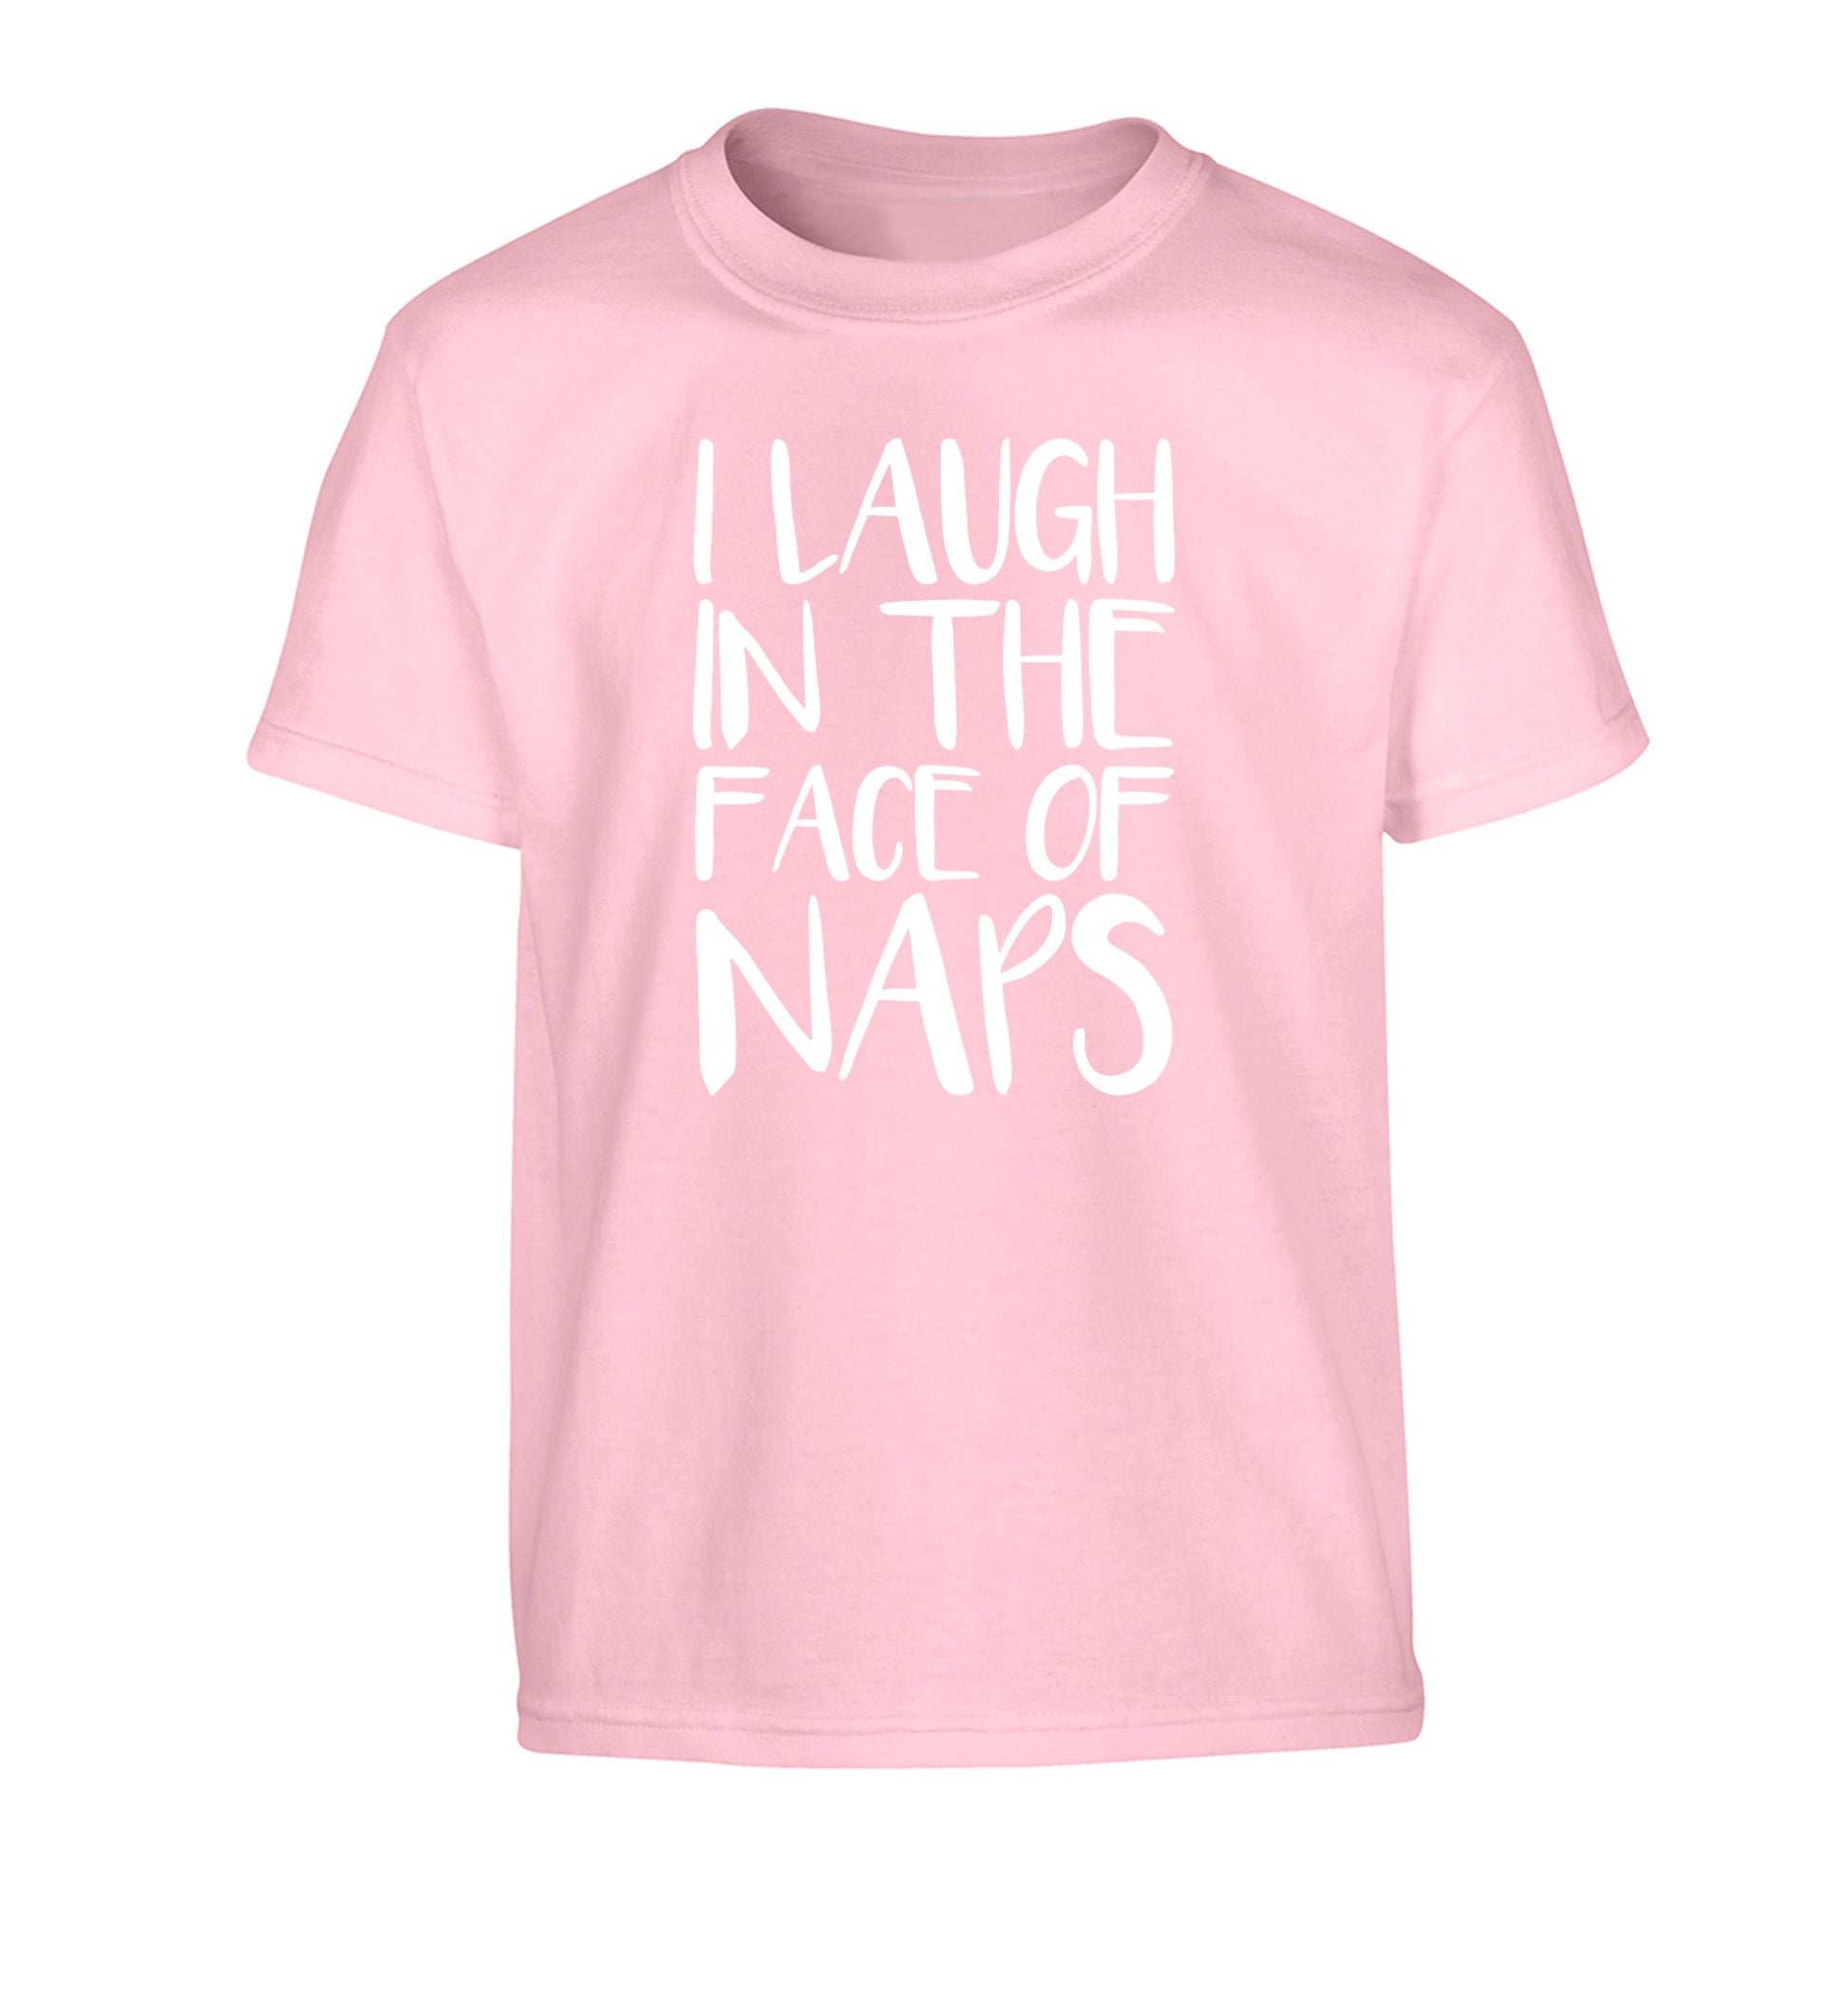 I laugh in the face of naps Children's light pink Tshirt 12-14 Years